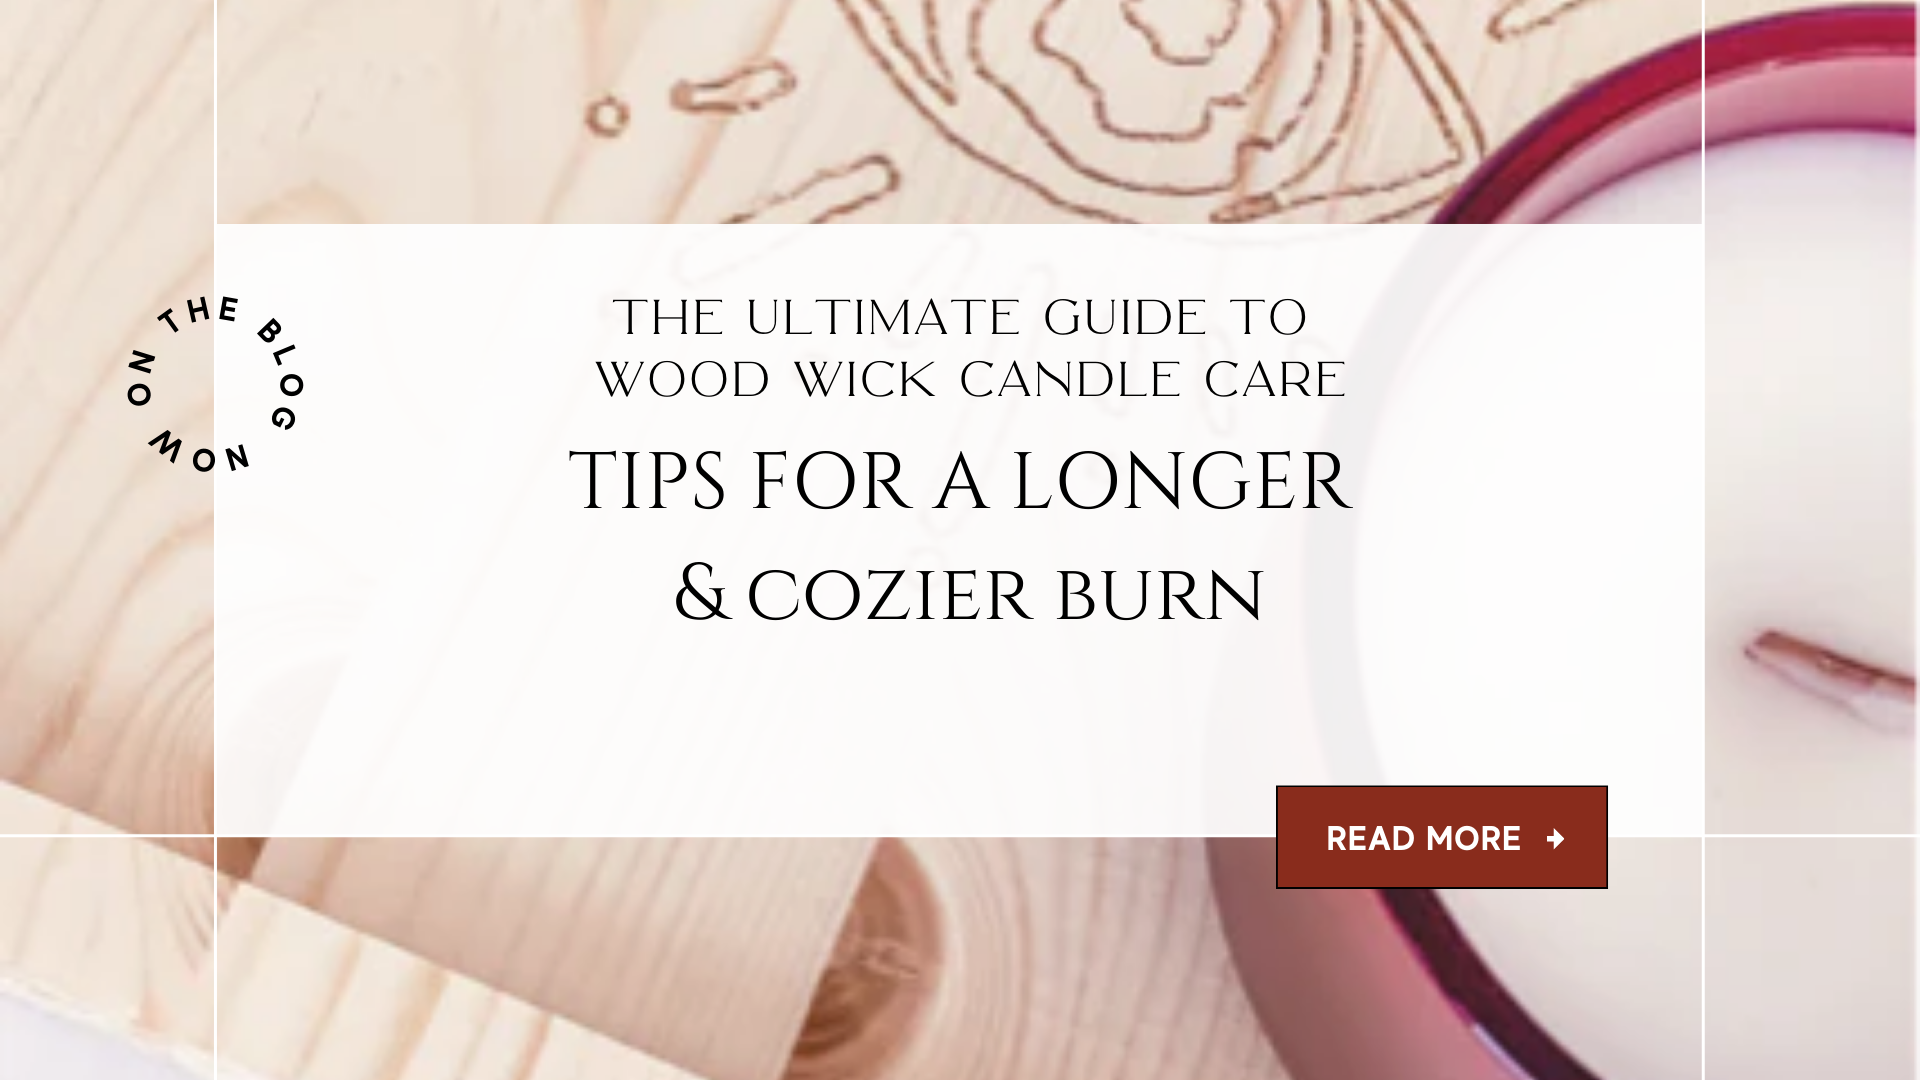 The Ultimate Guide to Wood Wick Candle Care: Tips for a Longer, Cozier Burn